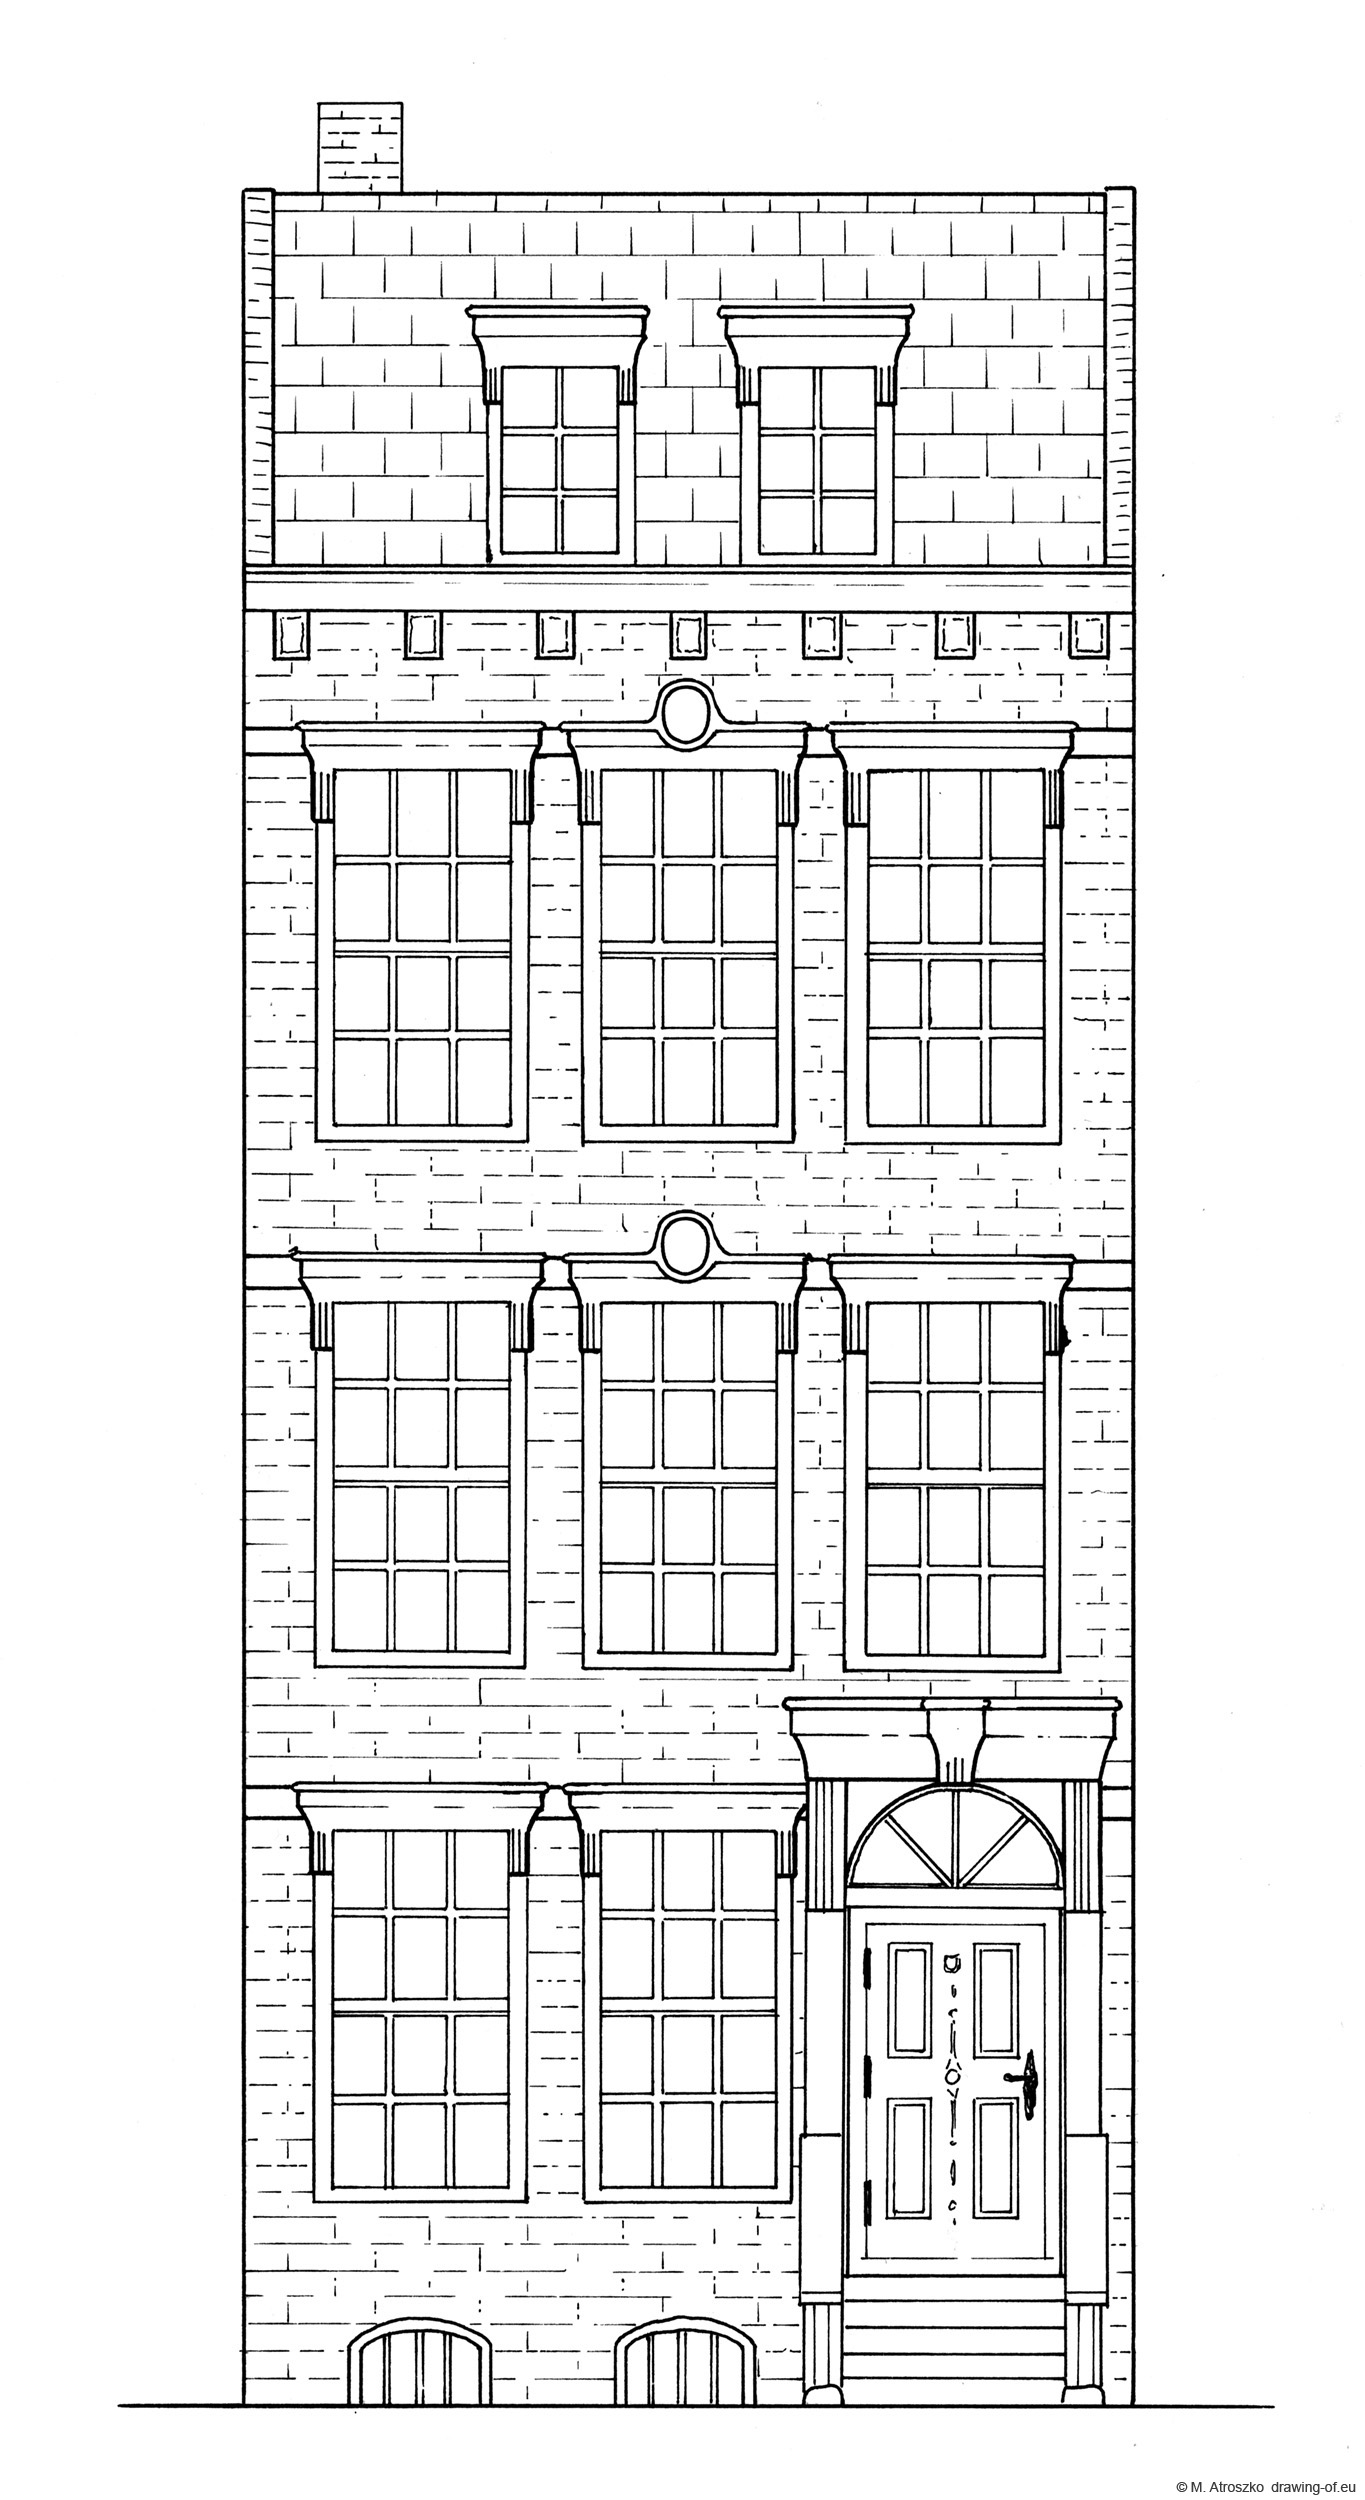 Drawing of row building